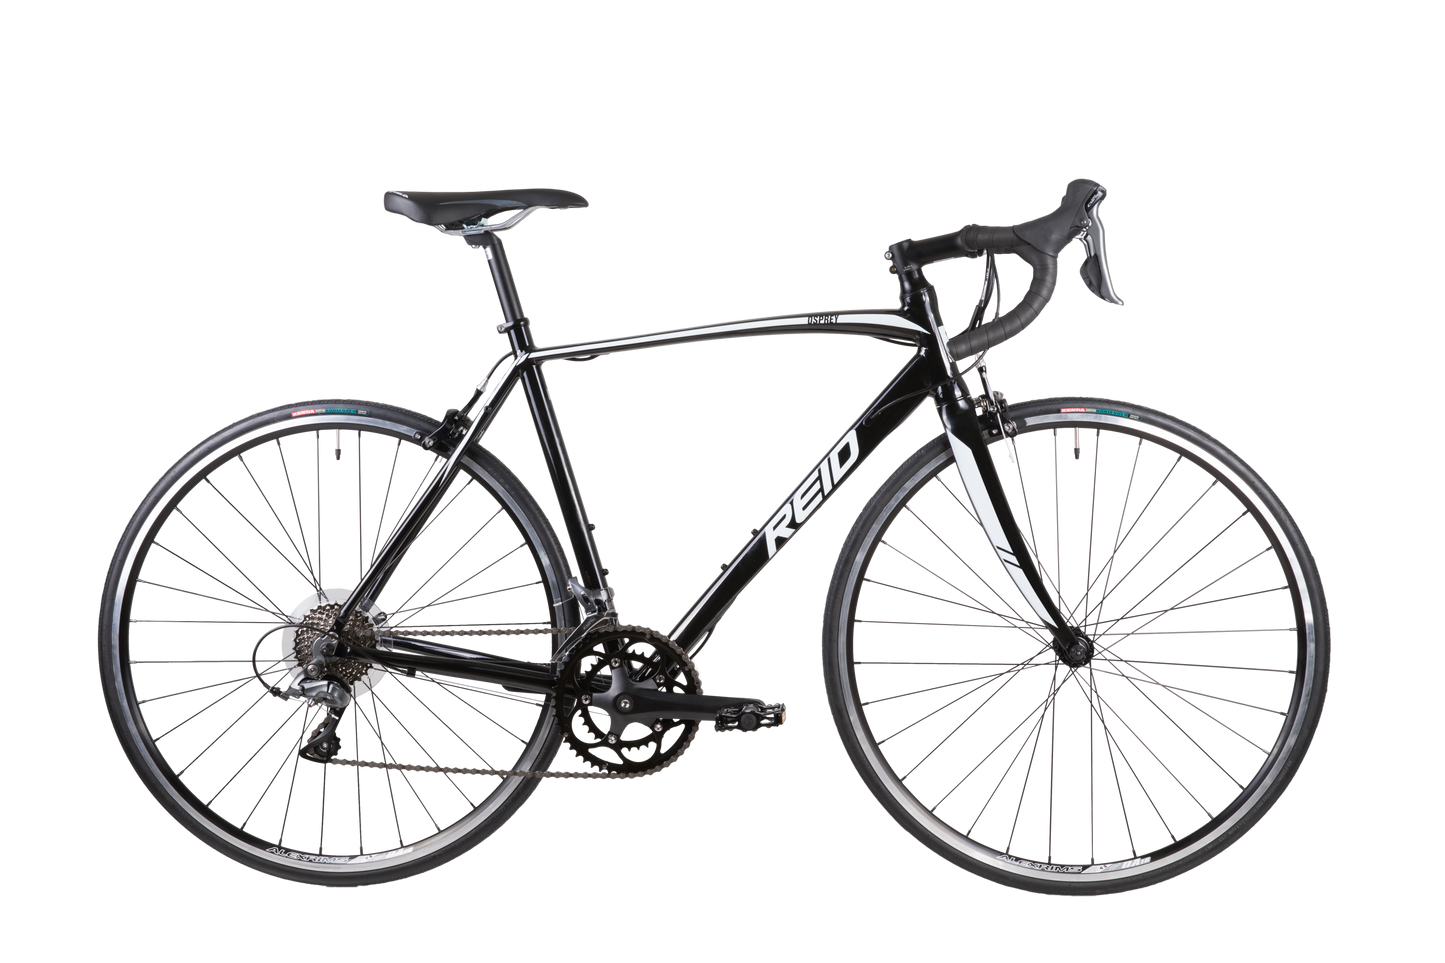 Osprey Road Bike in black with Shimano 8-speed gearing from Reid Cycles Australia